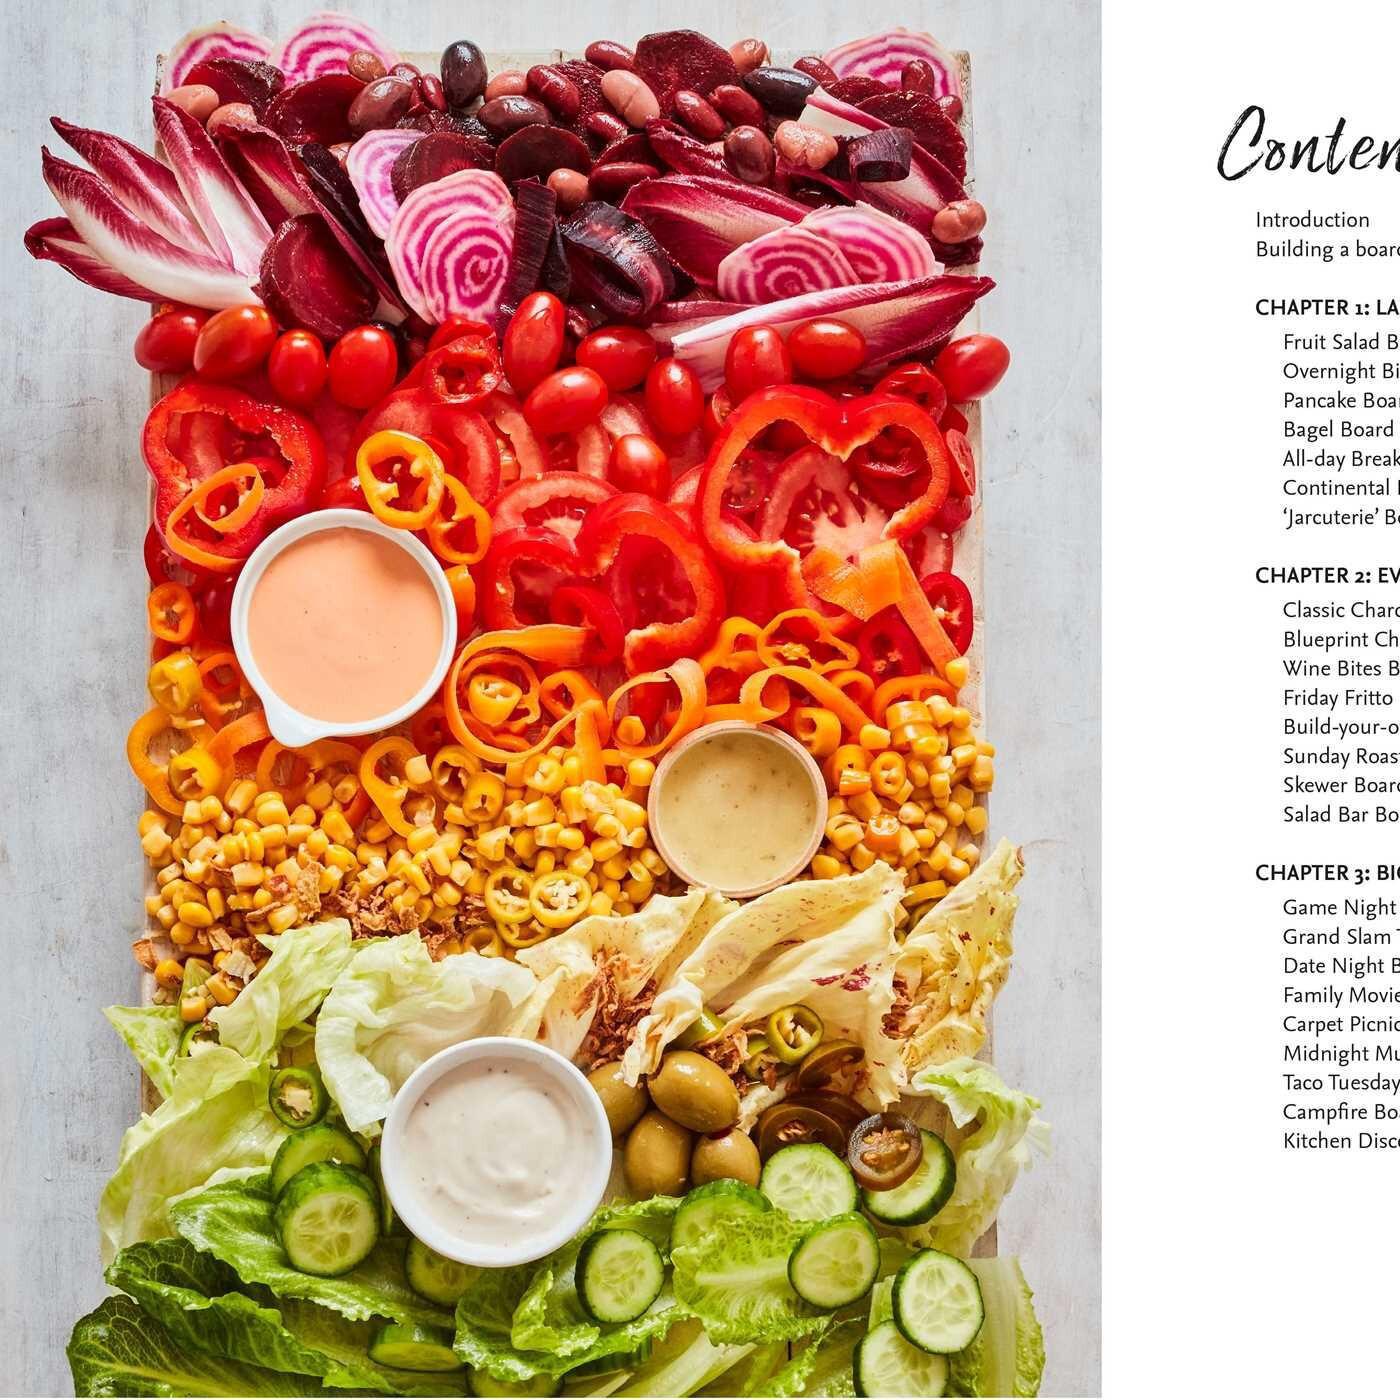 Book - Grazing & Feasting Boards